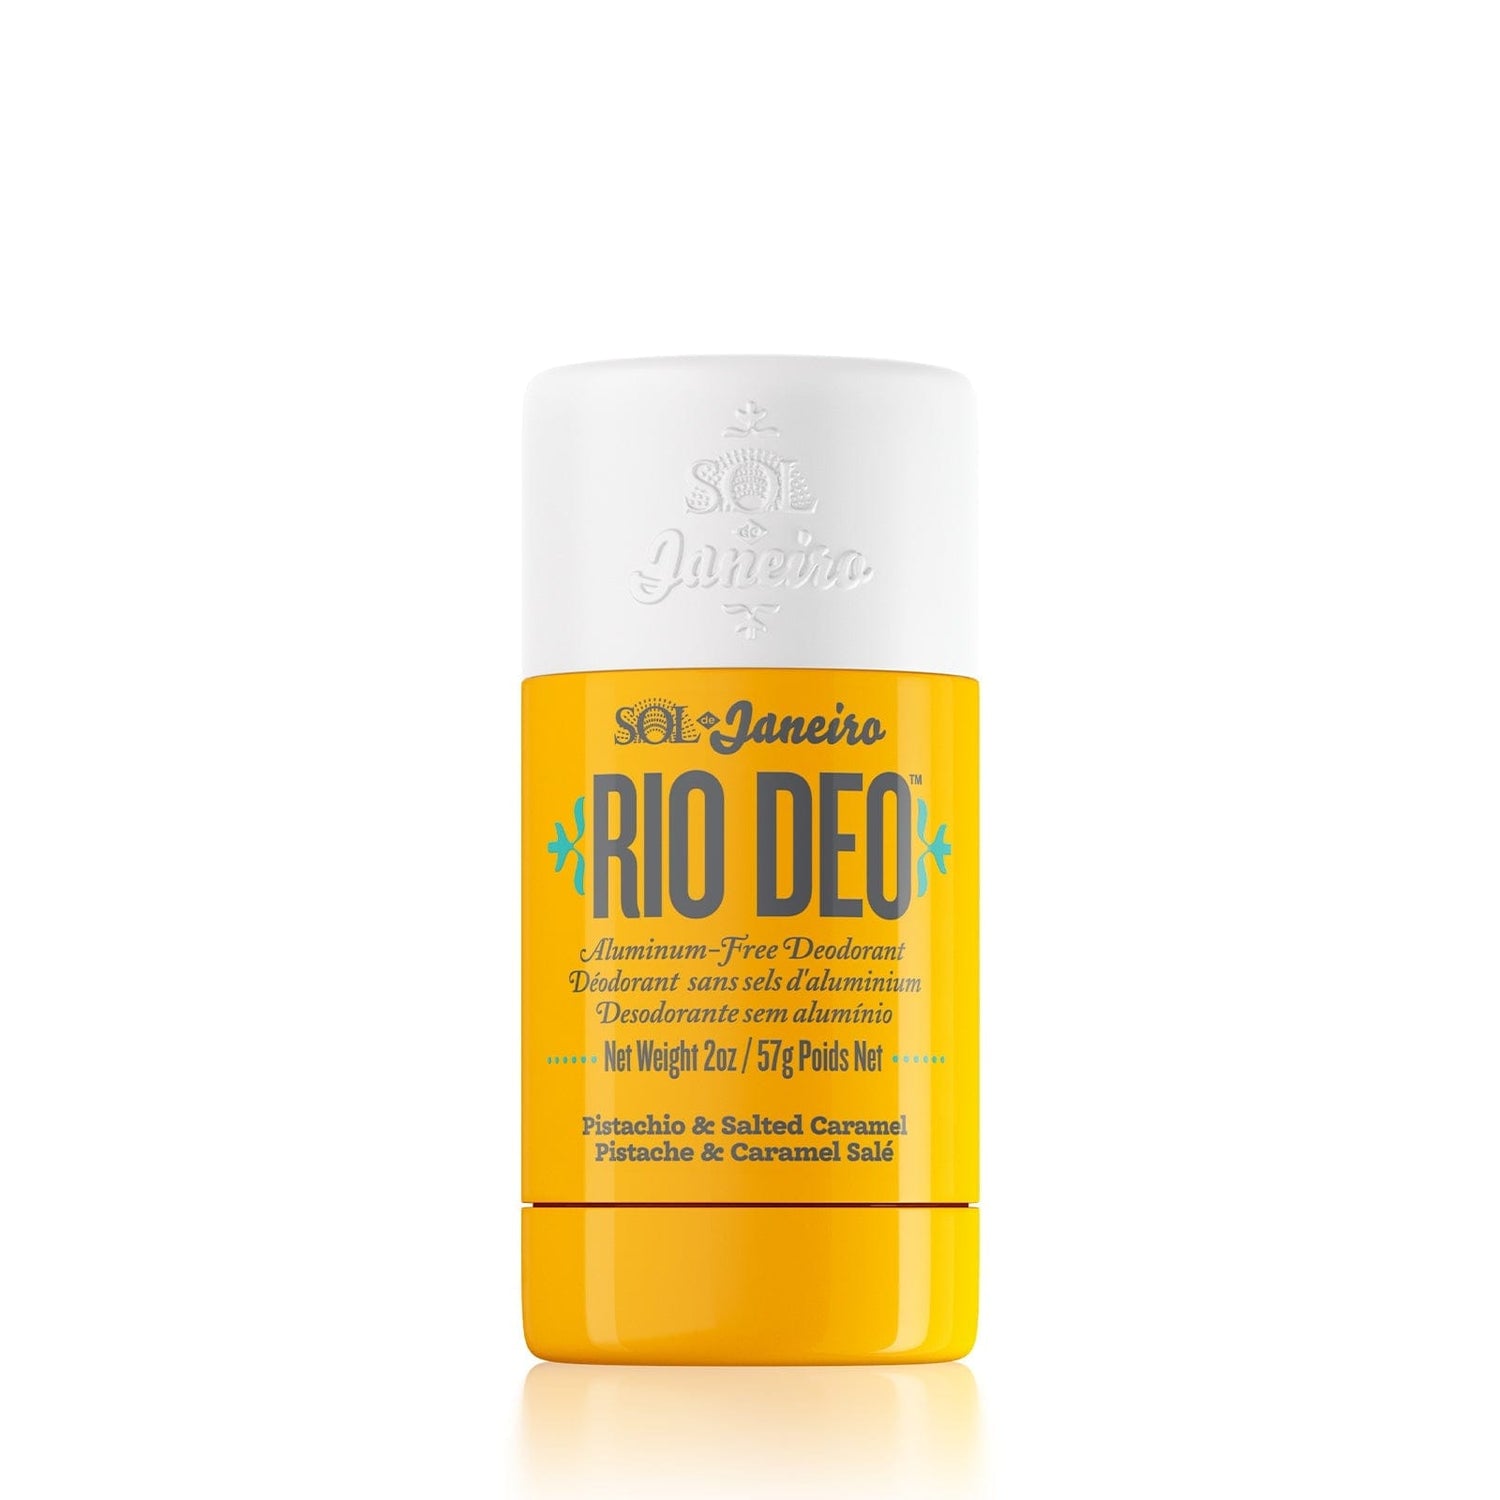 Rio Deo all day long! Our aluminum-free, baking soda-free deodorant  eliminates odor from sunrise to sunset + it's refillable! 🌅 (That…